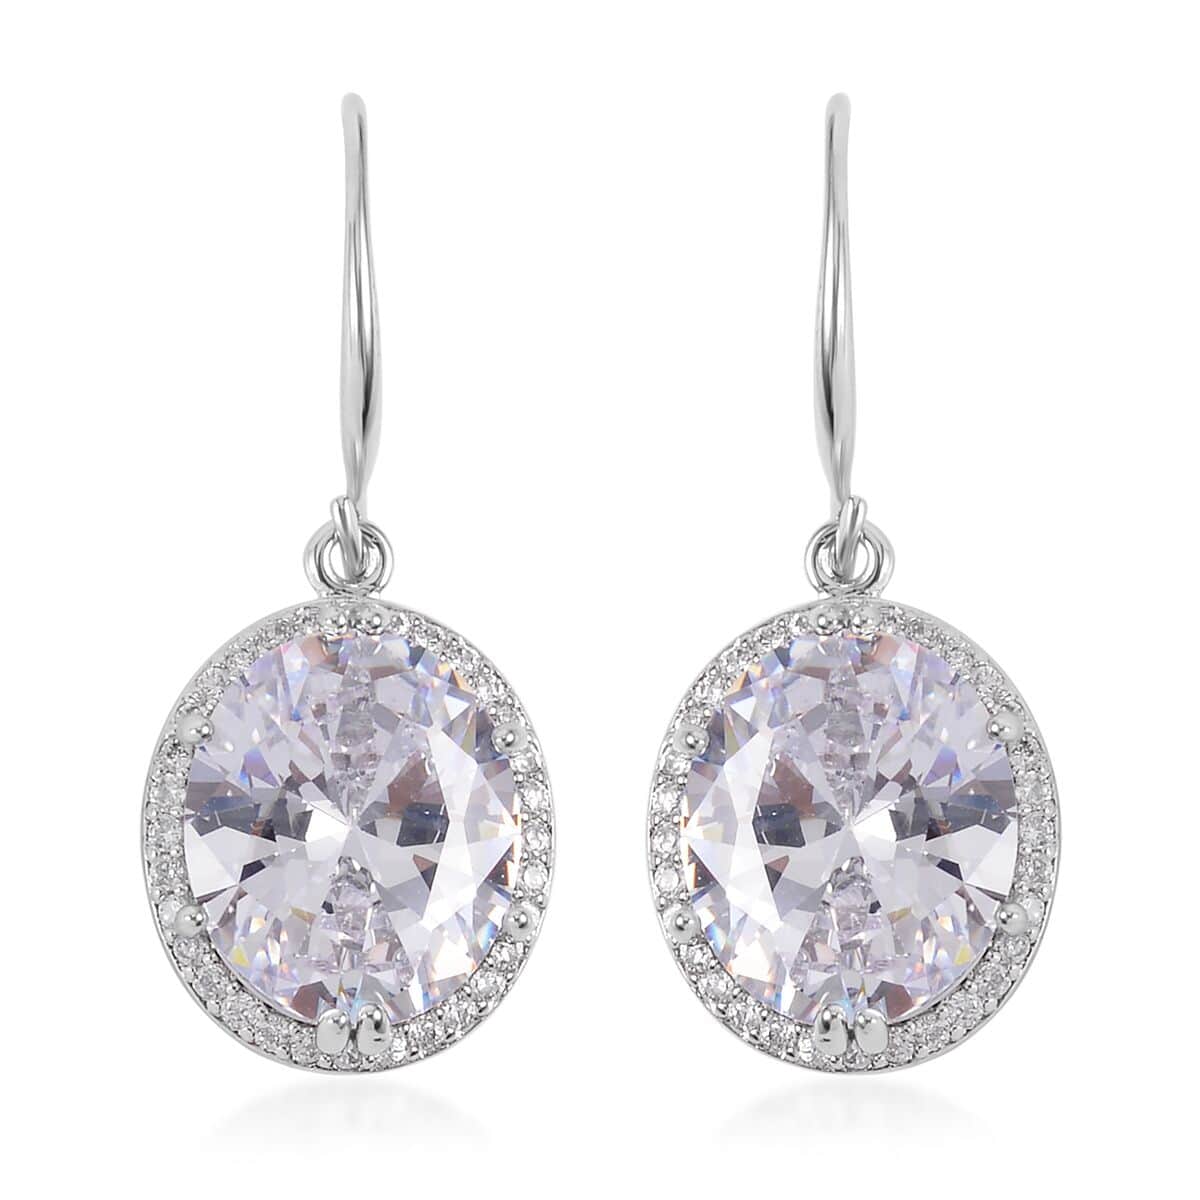 Simulated White Diamond Earrings, Halo Ring (Size 9.0) and Pendant Necklace in Silvertone 20-22 Inches image number 7